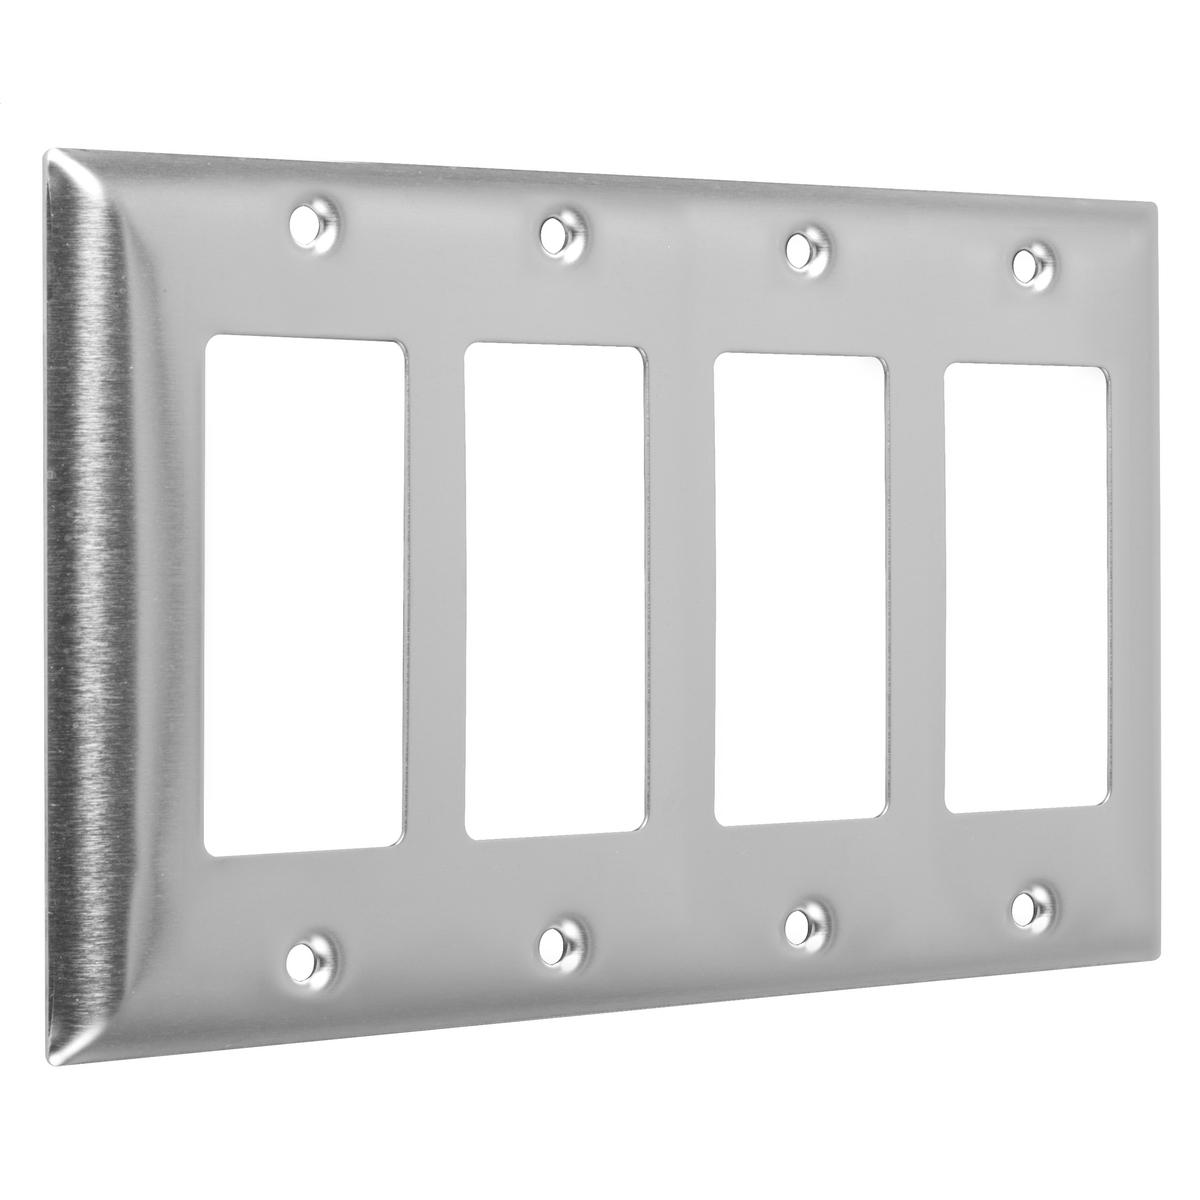 Hubbell WSS-RRRR 4-Gang Metal Wallplate, Standard, 4-Decorator, Stainless Steel  ; Easily primed and painted to match or complement walls. ; Won't bow, crack or distort during installation. ; Premium North American powder coat. ; Includes screw(s) in matching finish.